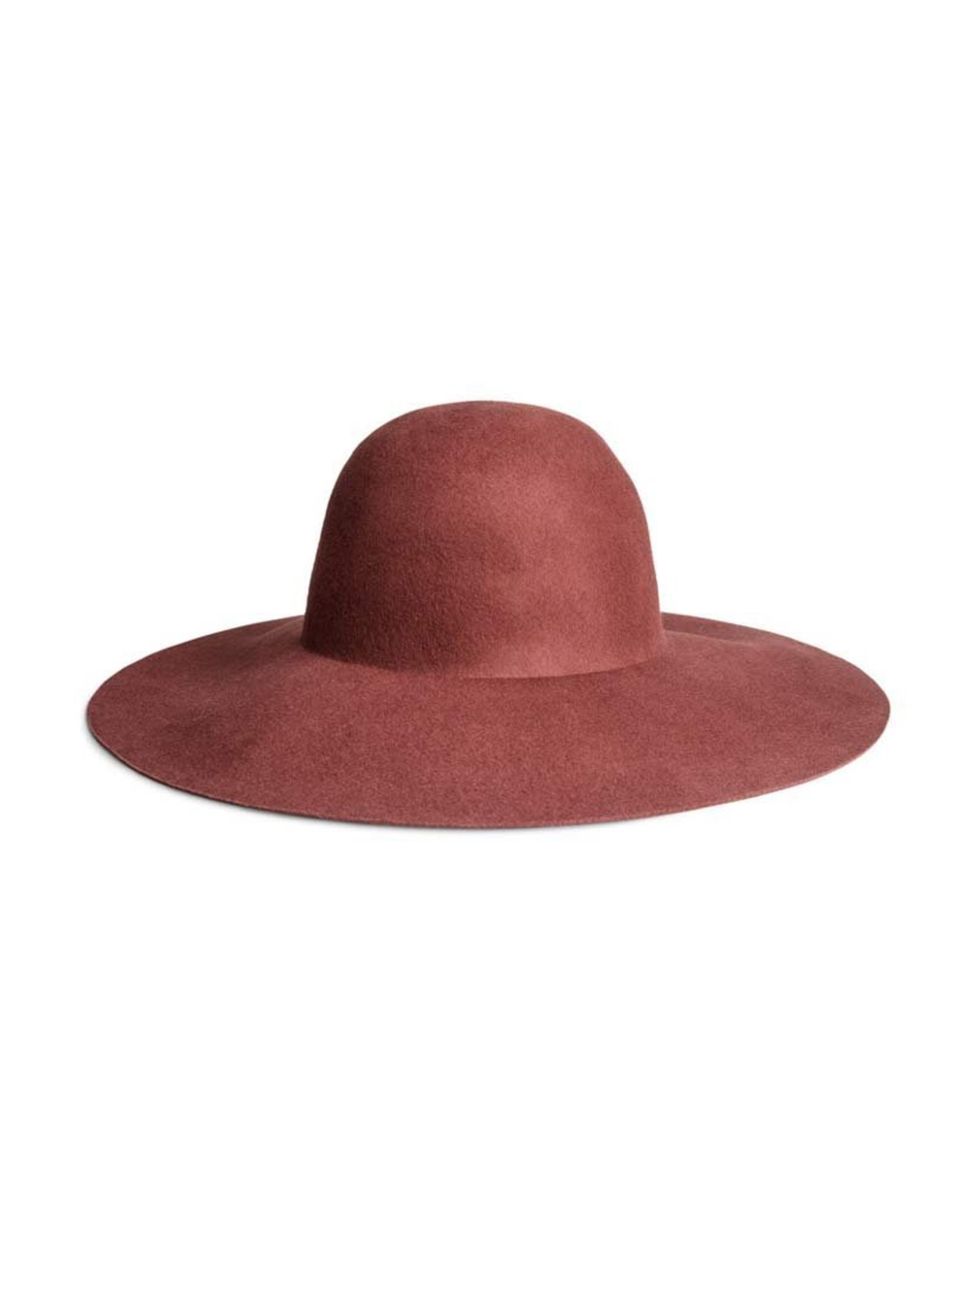 <p>This 70s russet red will look great with tan and denim for spring.</p><p><a href="http://www.hm.com/gb/product/18312?article=18312-C">H&amp;M</a> hat, £14.99</p>